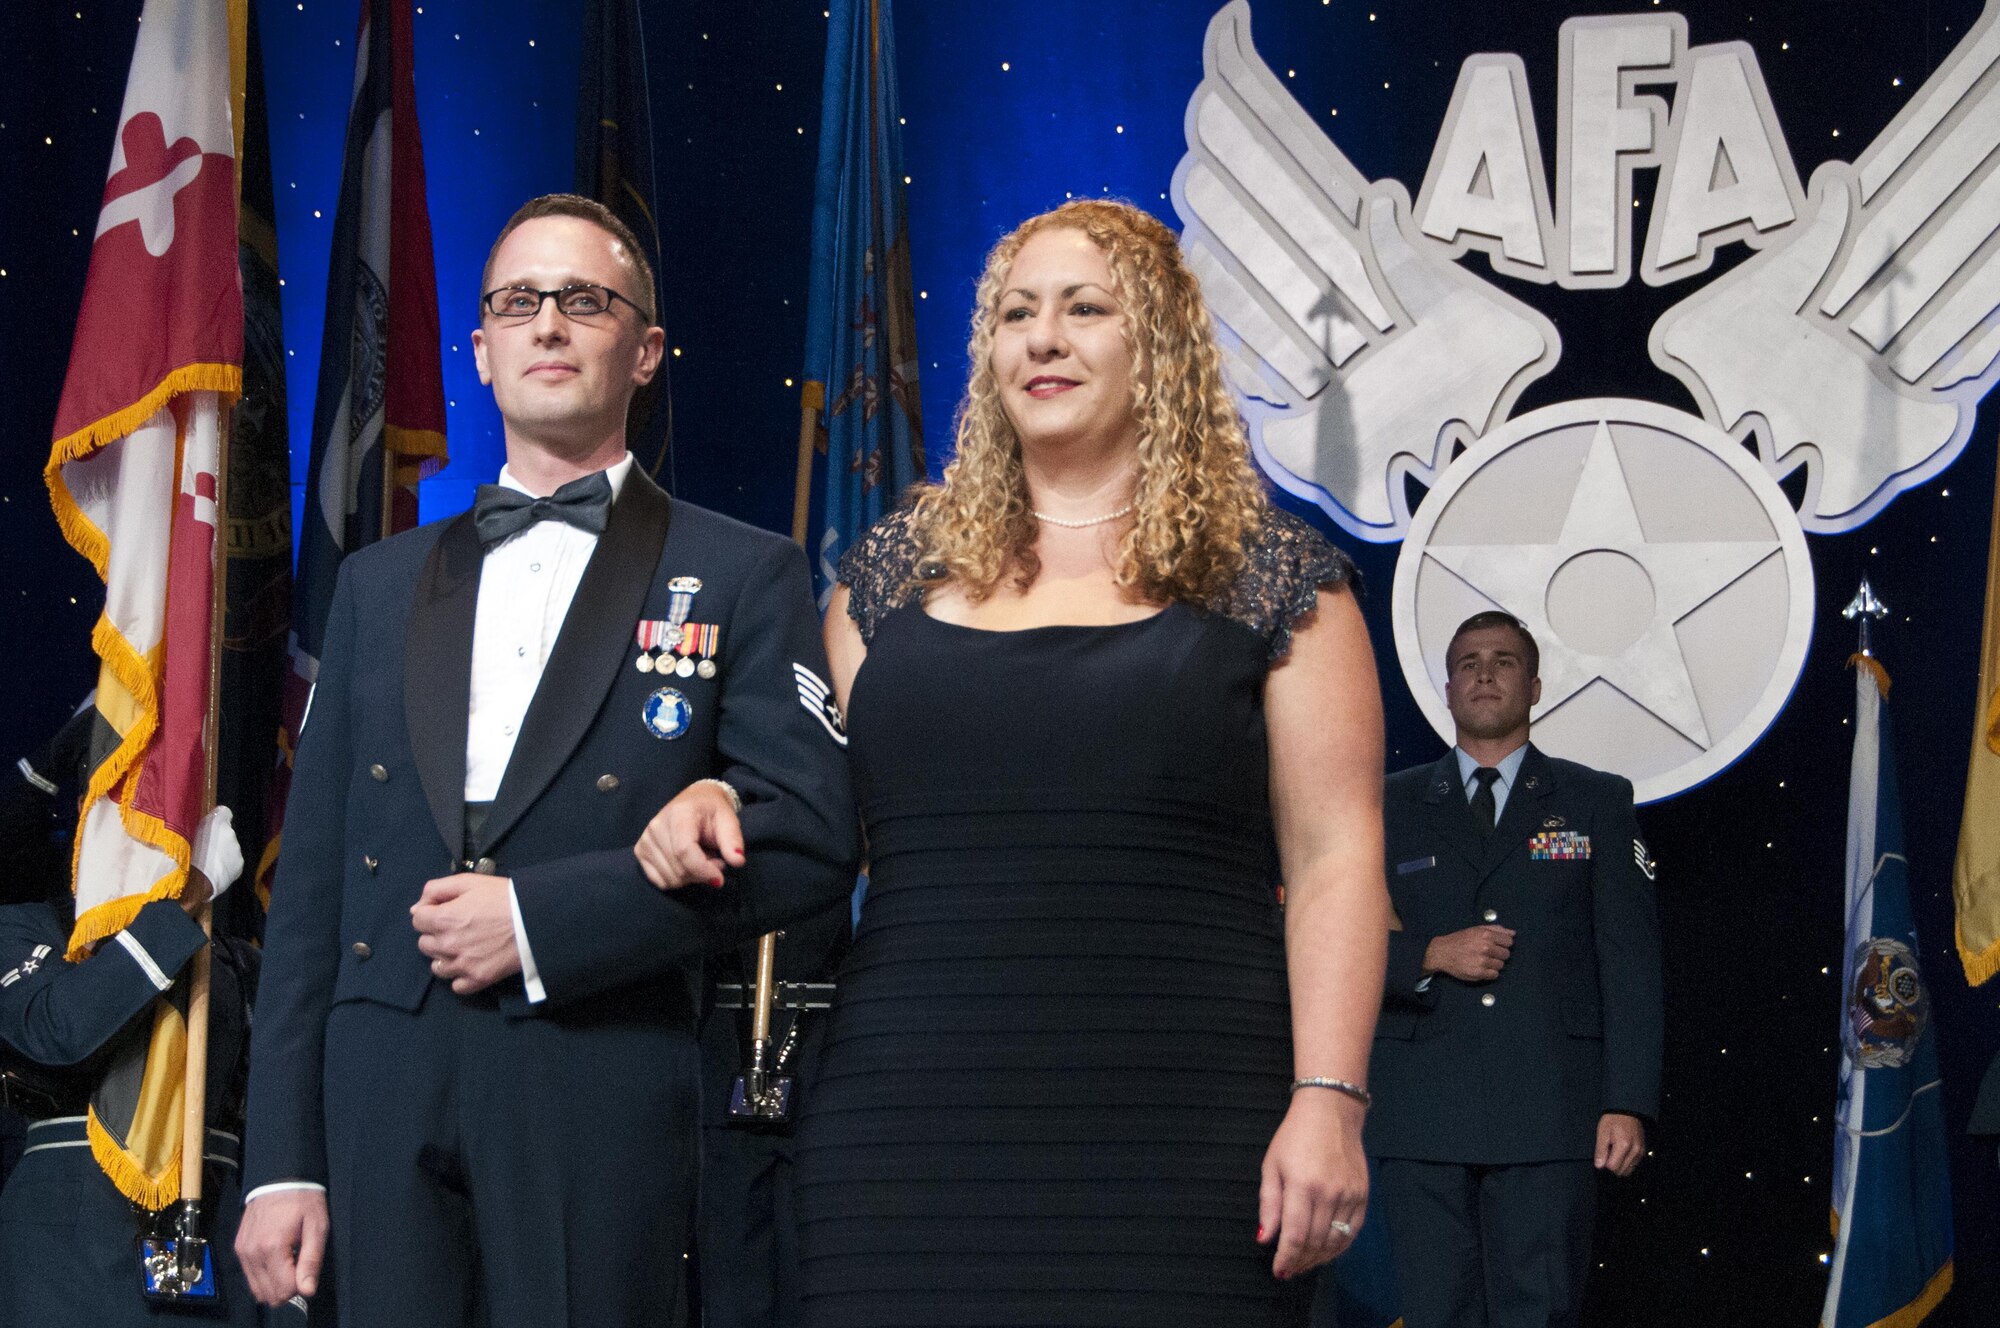 Staff Sgt. Aaron Tobler and his wife, Natalie, at the Air Force Association's recognition banquet honoring the 12 Outstanding Airmen of the Year in Washington, D.C., Sept. 19, 2016.  Tobler is a geospatial intelligence analyst with the 50th Intelligence Squadron, Beale Air Force Base, California.